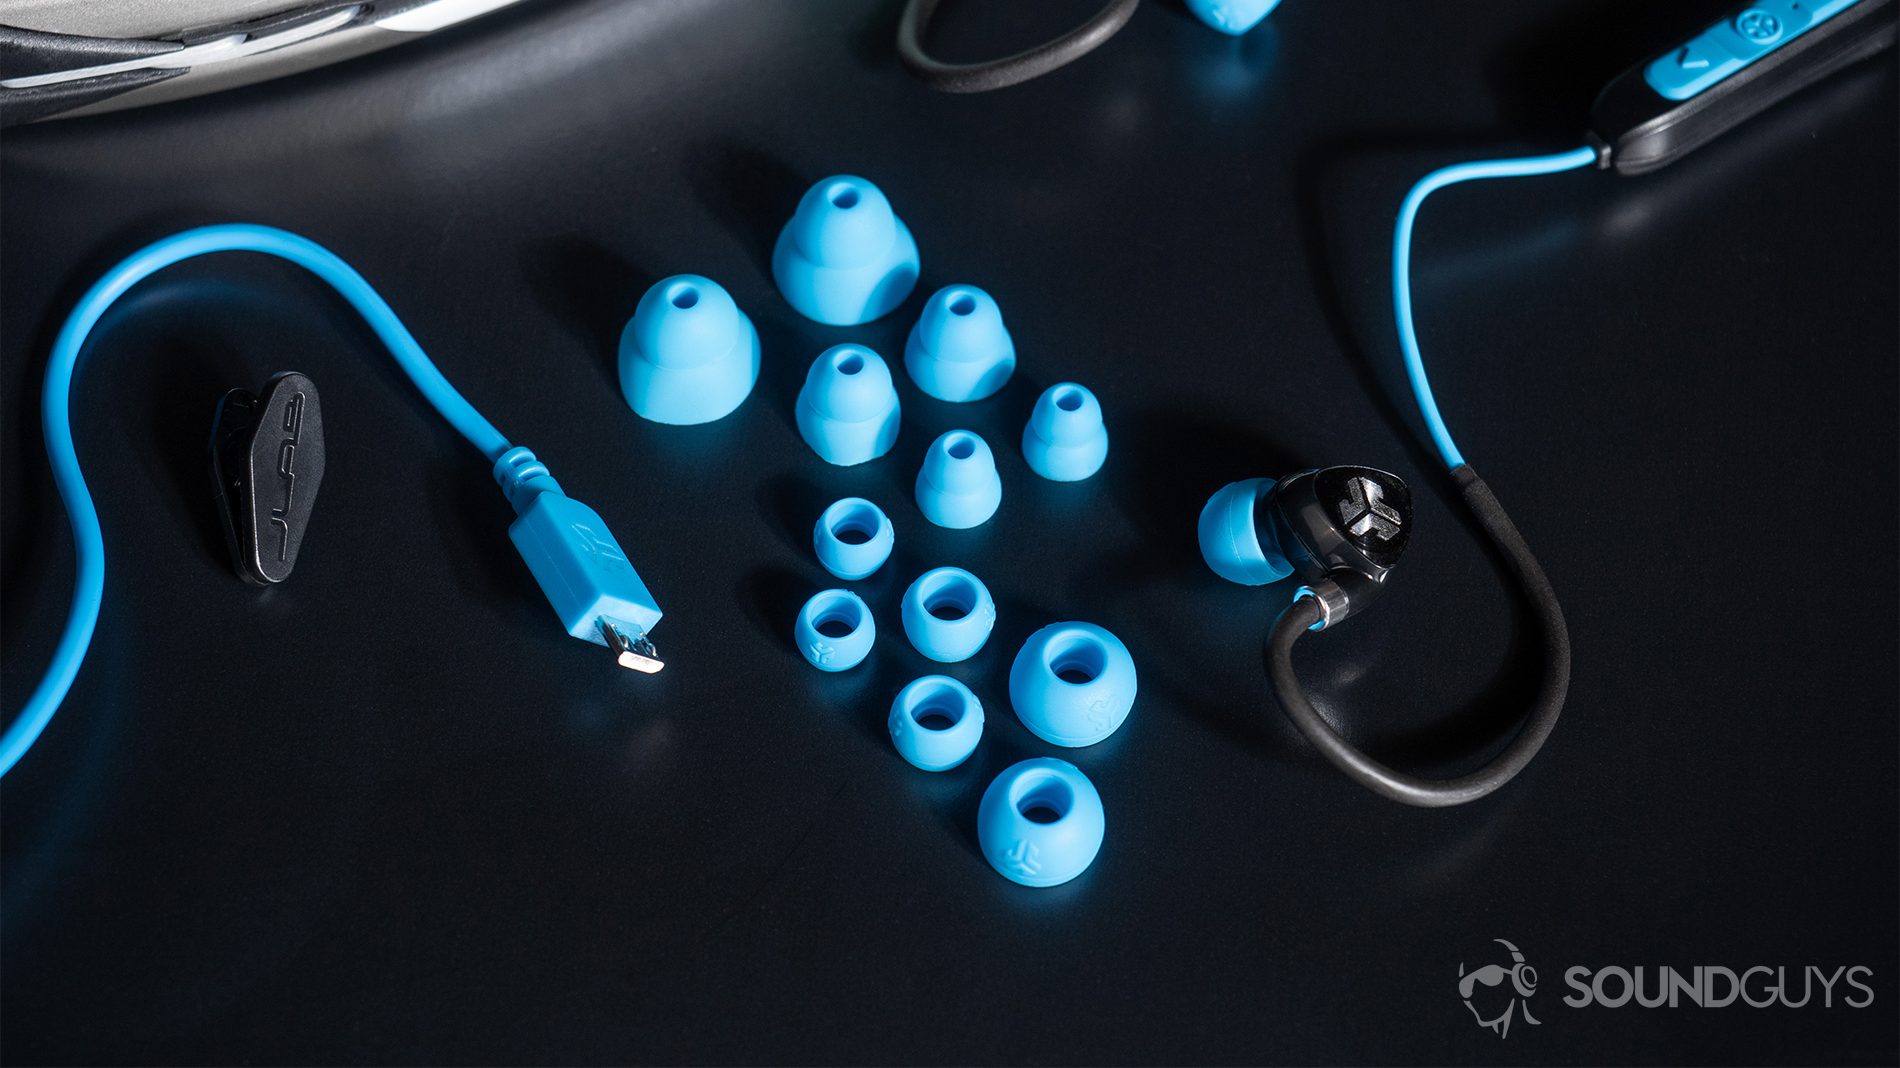 JLab Fit Sport Wireless: The earbuds and all of its inclusions: six pairs of spare ear tips, a shirt clip, and micro-USB cable.